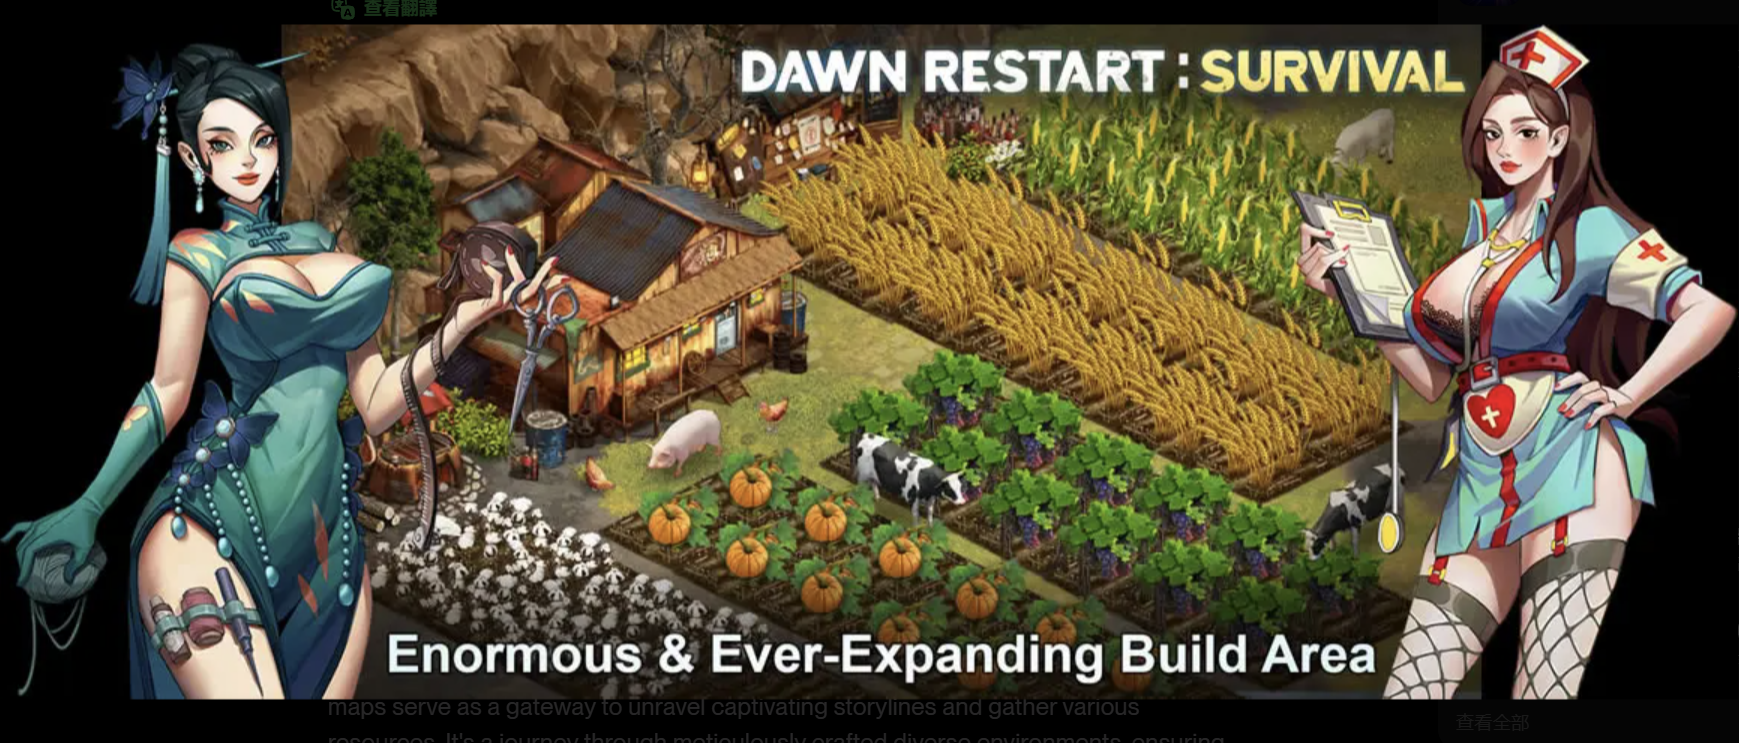 Resilience Unveiled at Dusk: Navigating the Aftermath in 'Dawn Restart: Survival'